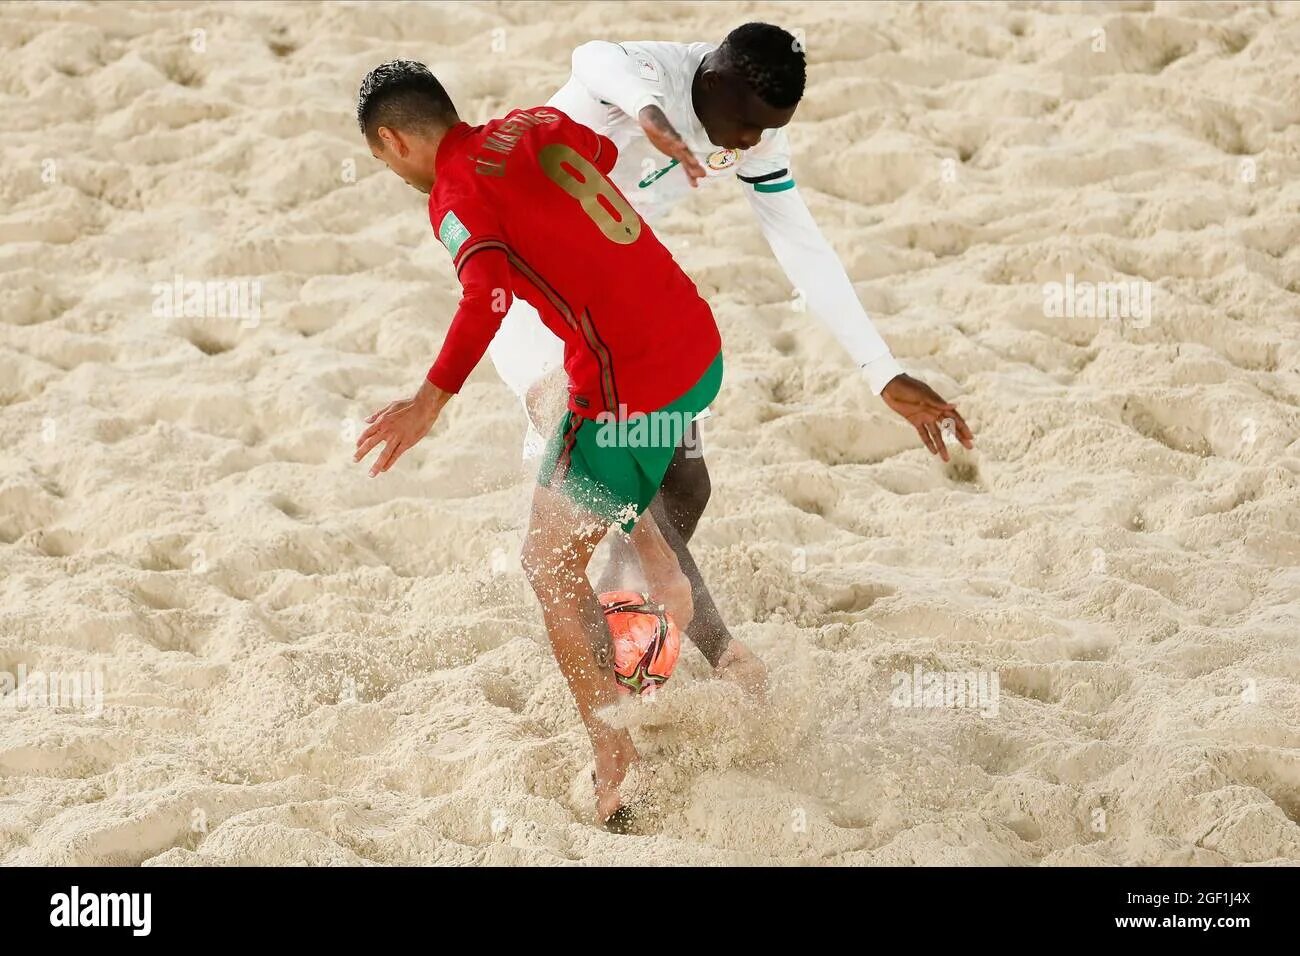 26 22 10. Beach Soccer Portugal. FIFA Beach Soccer World Cup яукифшвофт. FIFA Beach Soccer World Cup Russia 2021 Getty images.